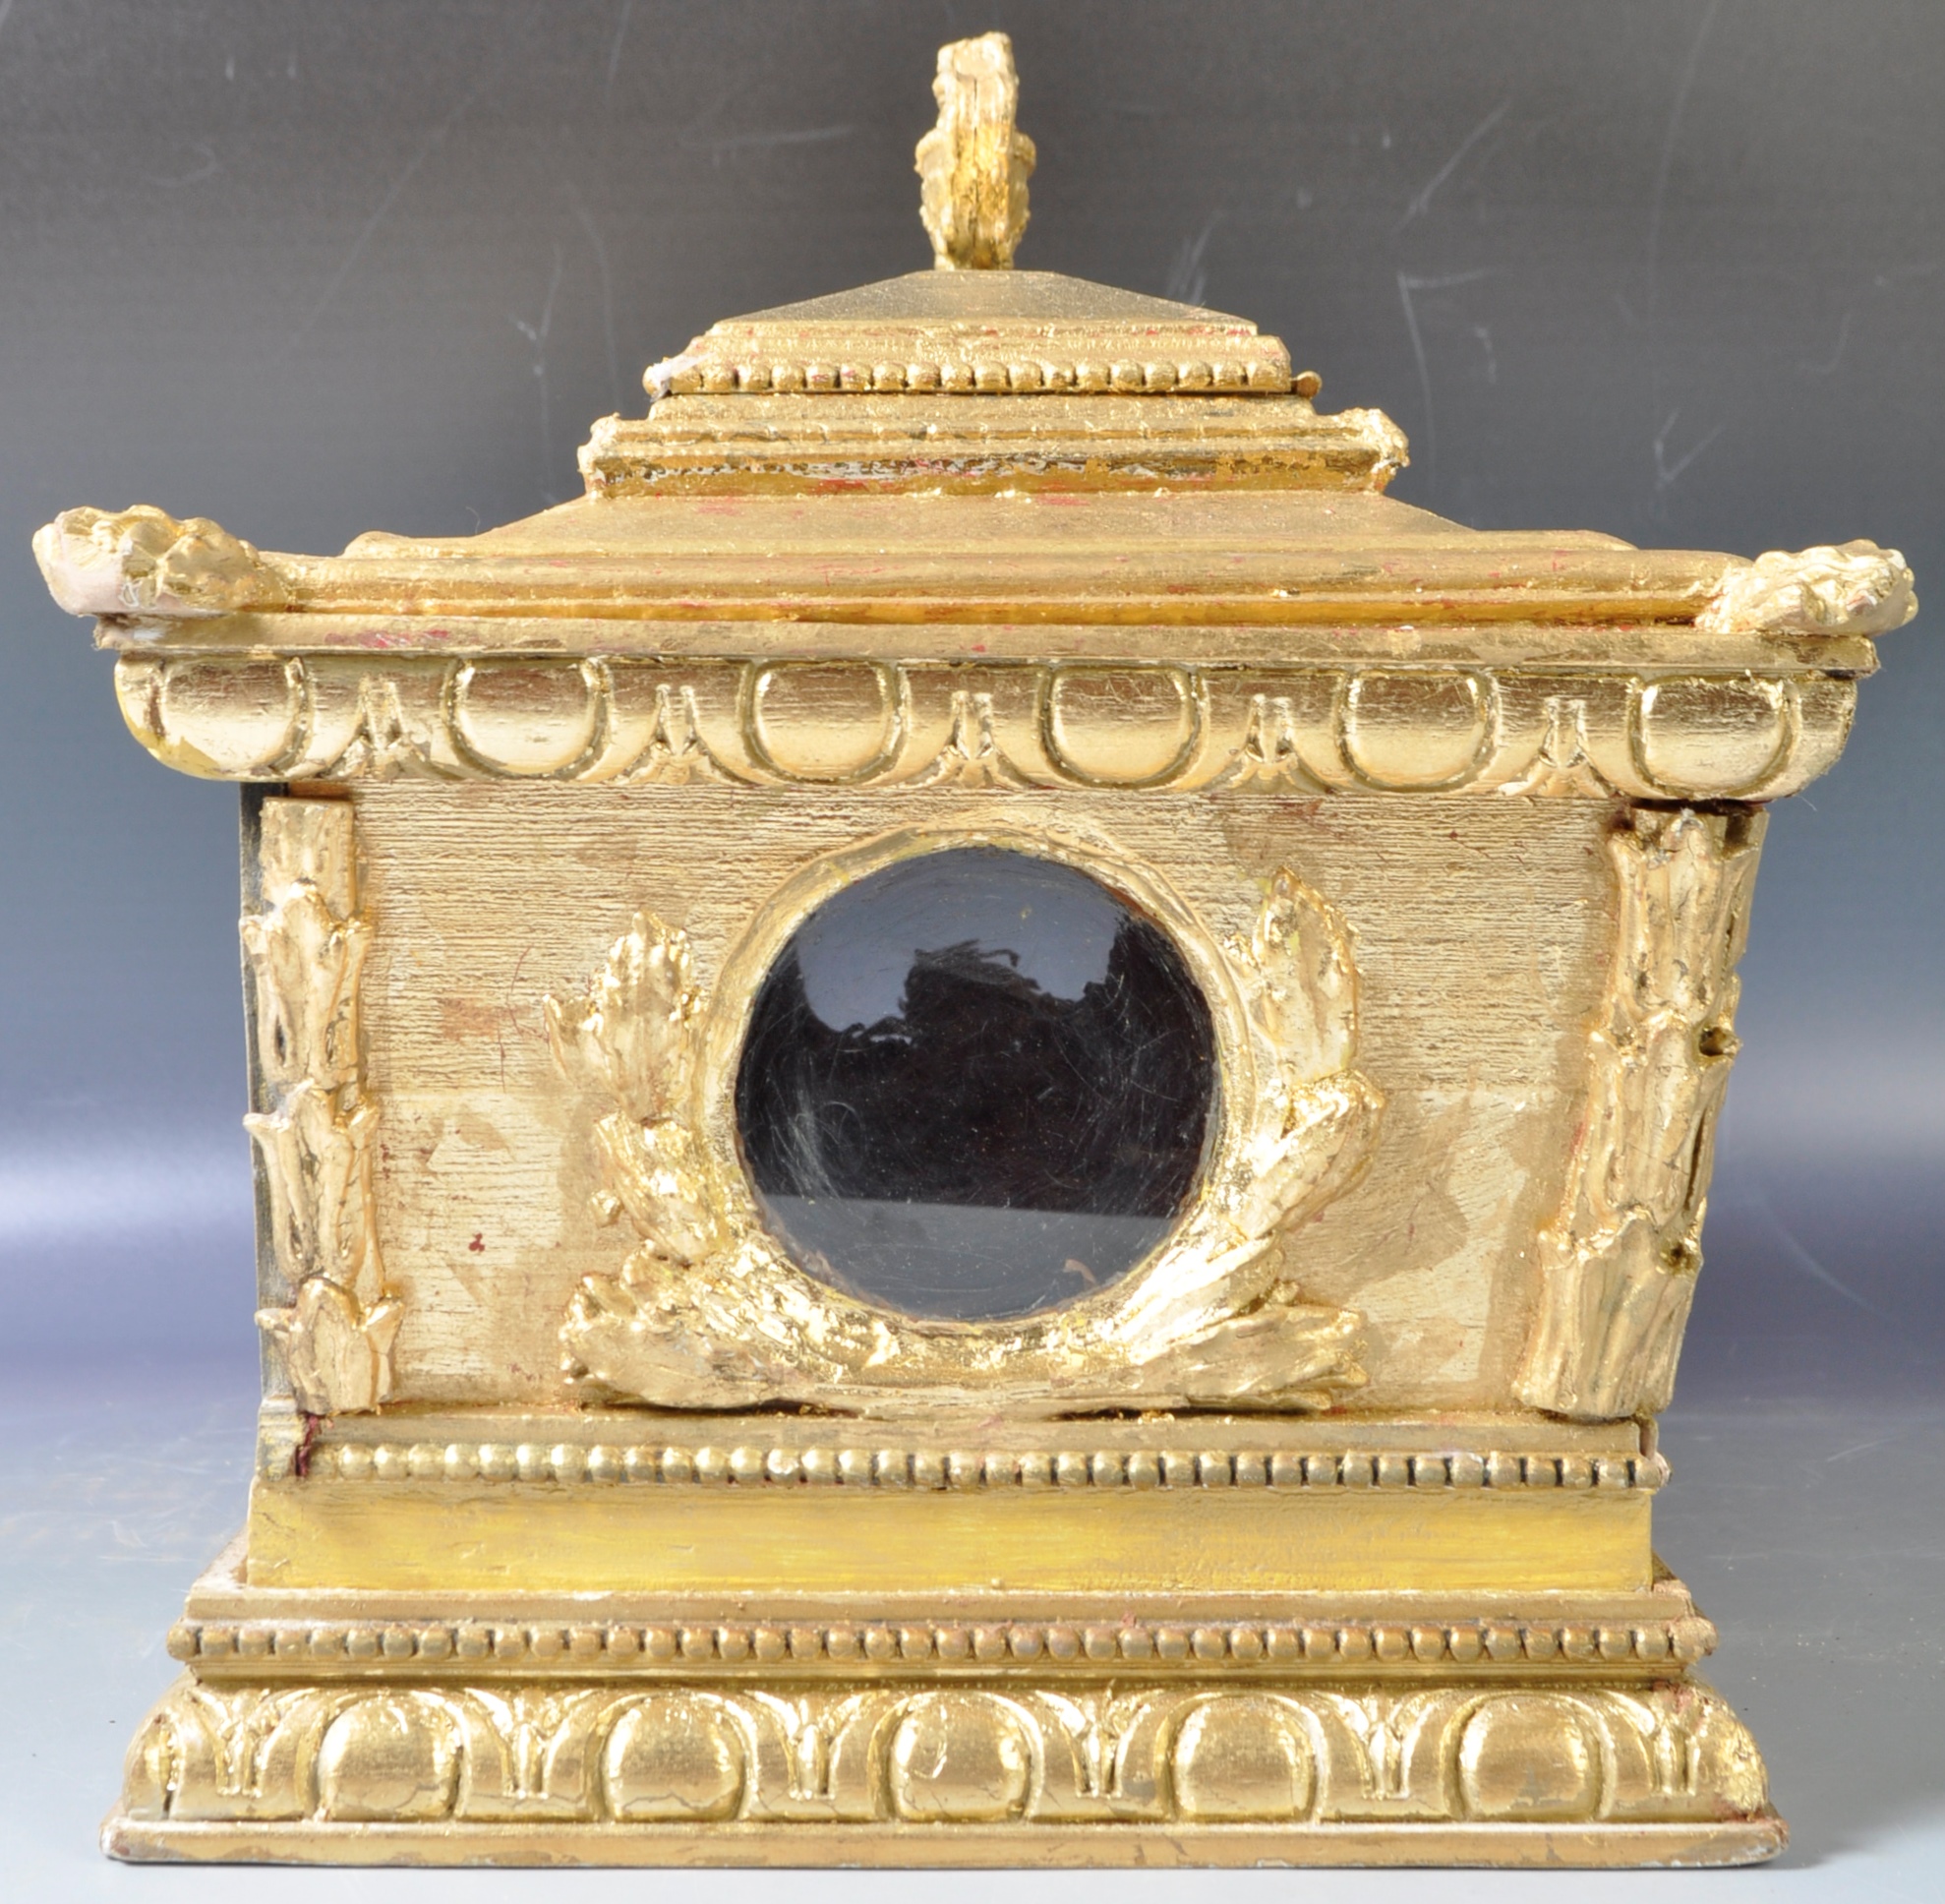 ANTIQUE 18TH CENTURY GILT PAINTED RELIQUARY CABINET - Image 5 of 6